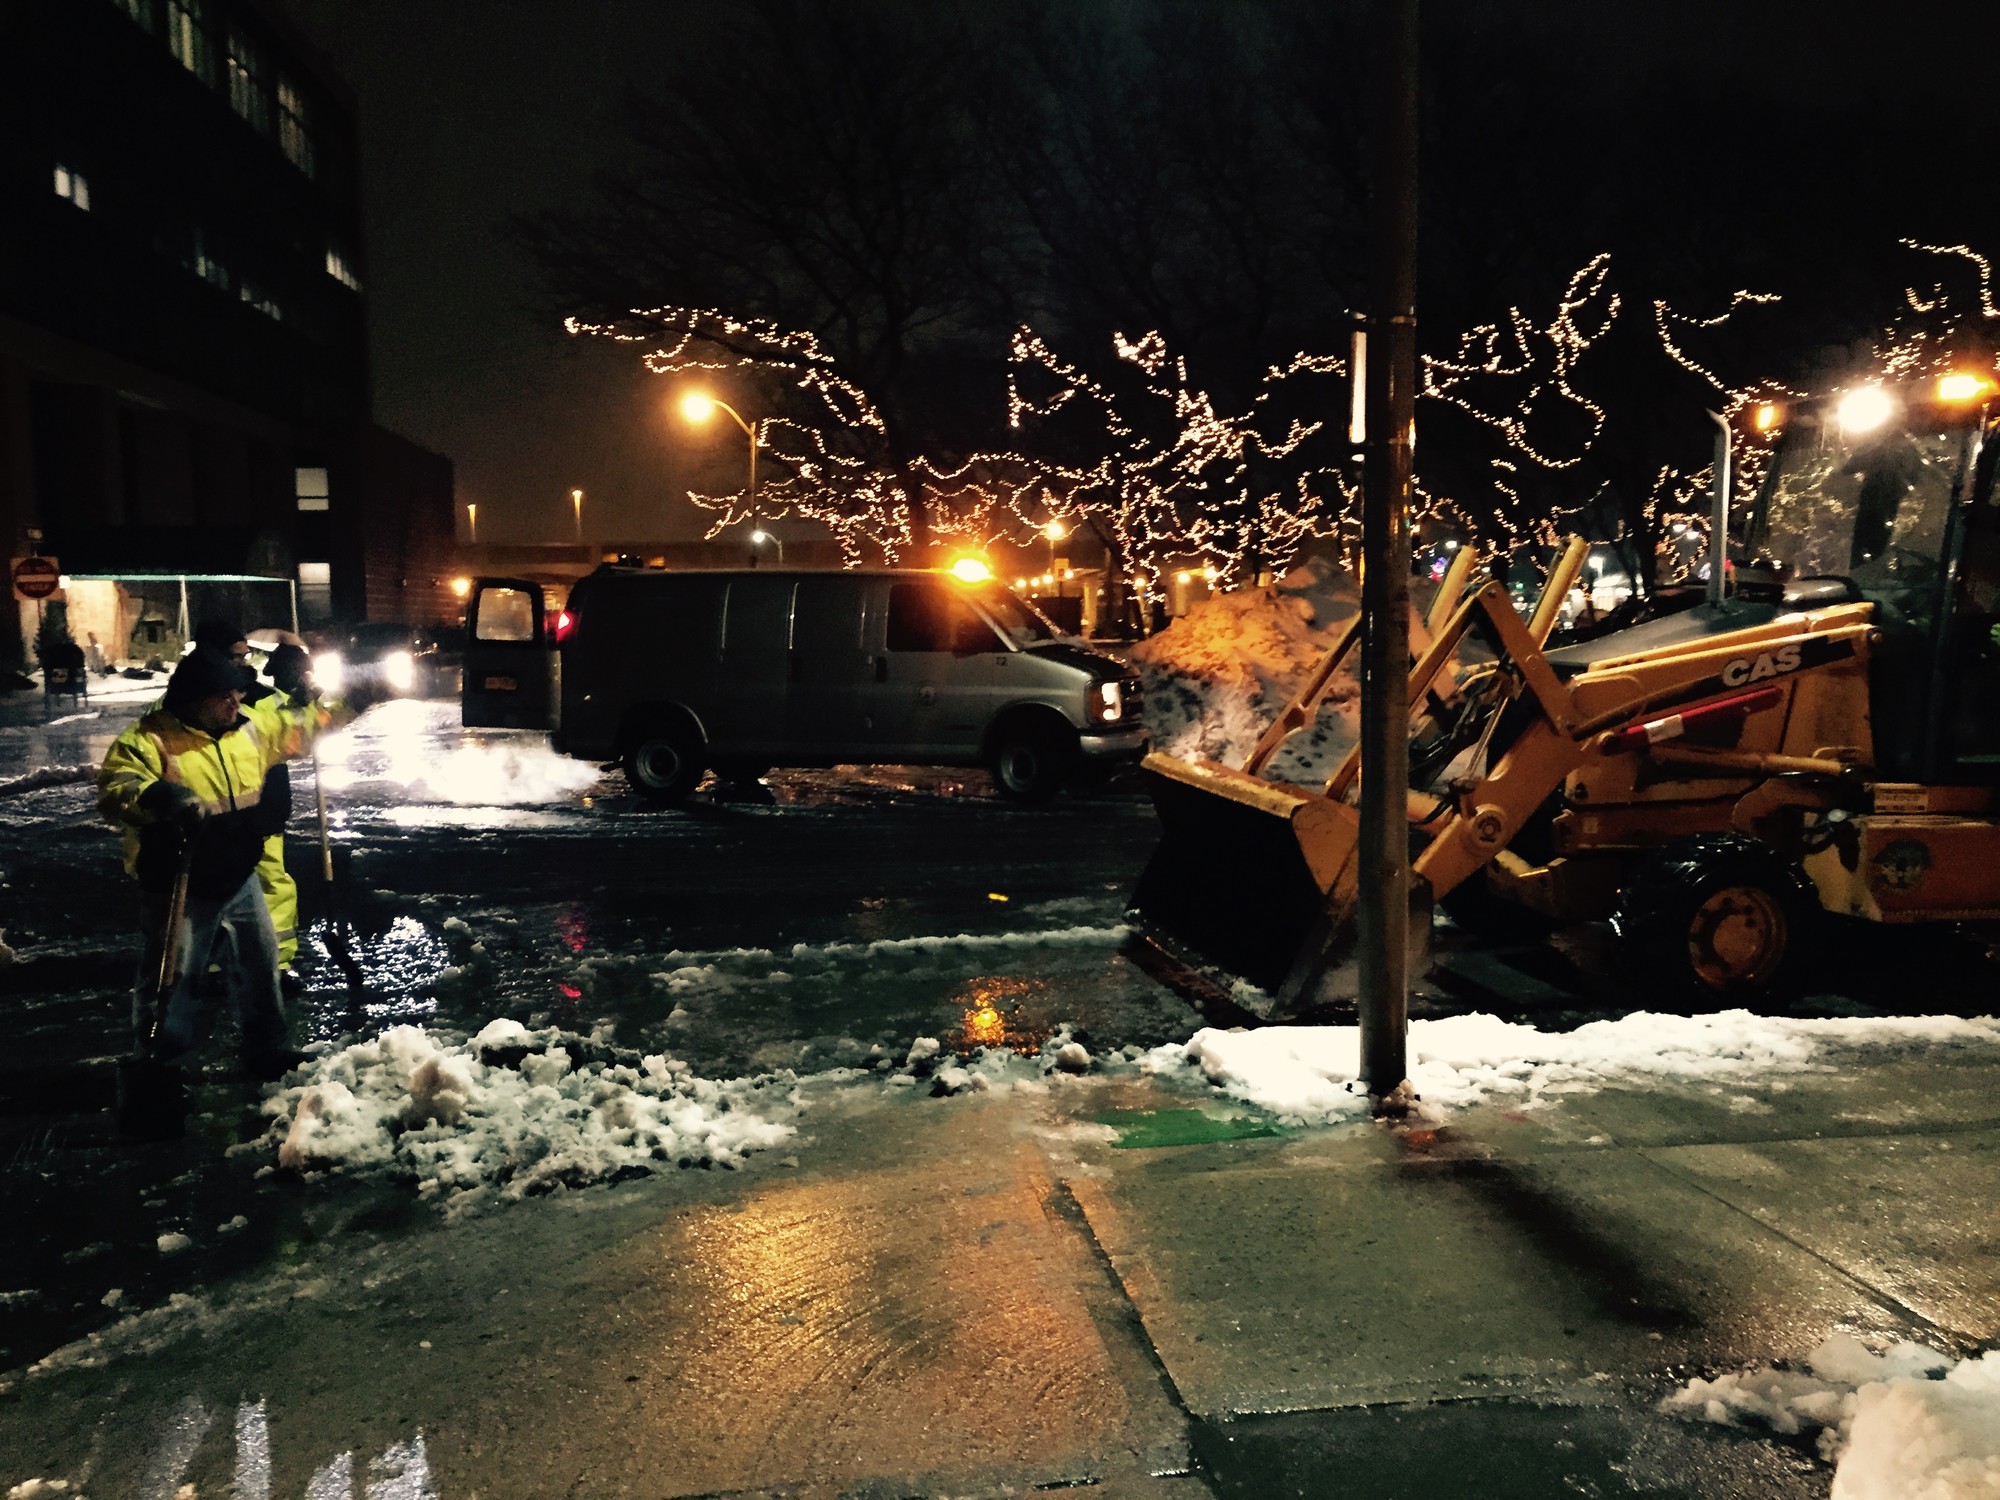 DPW crews cleared snow and storm drains on National Boulevard Tuesday night.